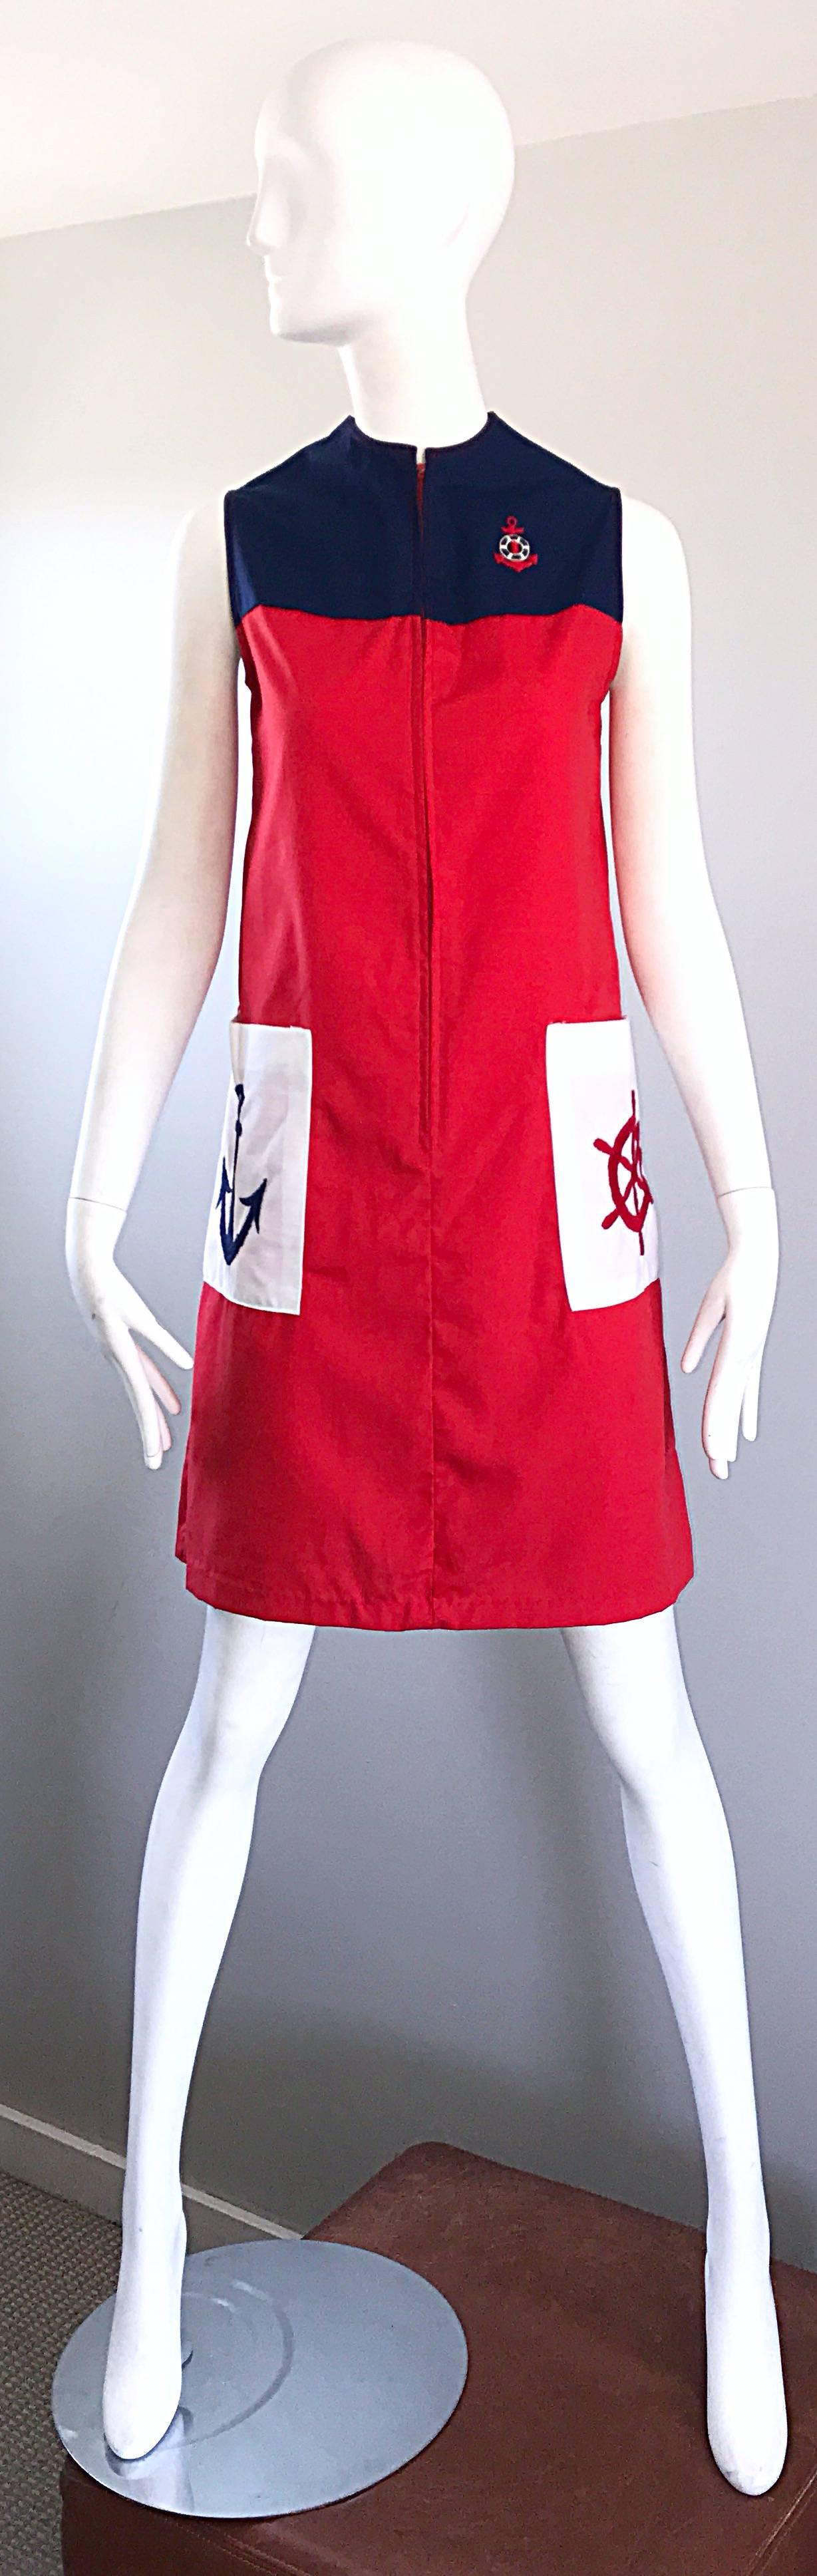 Chic 1960s Red, White and Navy Blue Nautical Sailor Vintage 60s A Line Dress  3